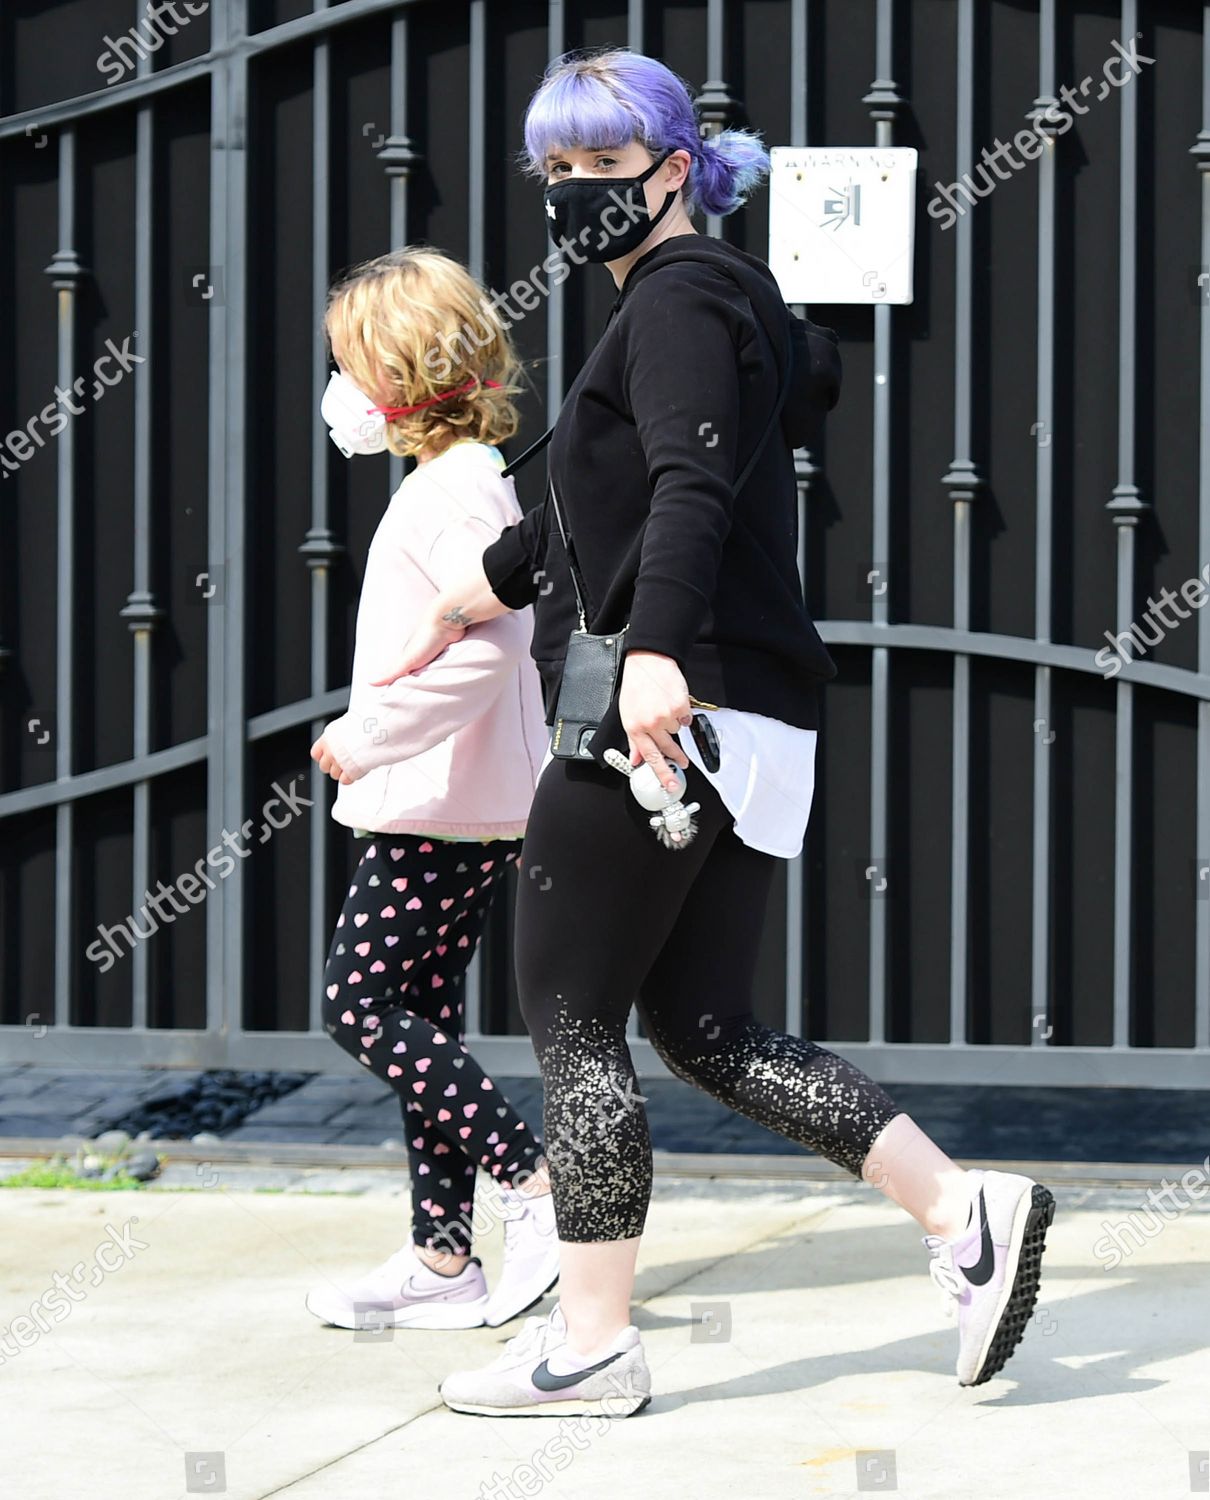 Kelly Osbourne Wears Face Mask Out Her Editorial Stock Photo Stock Image Shutterstock